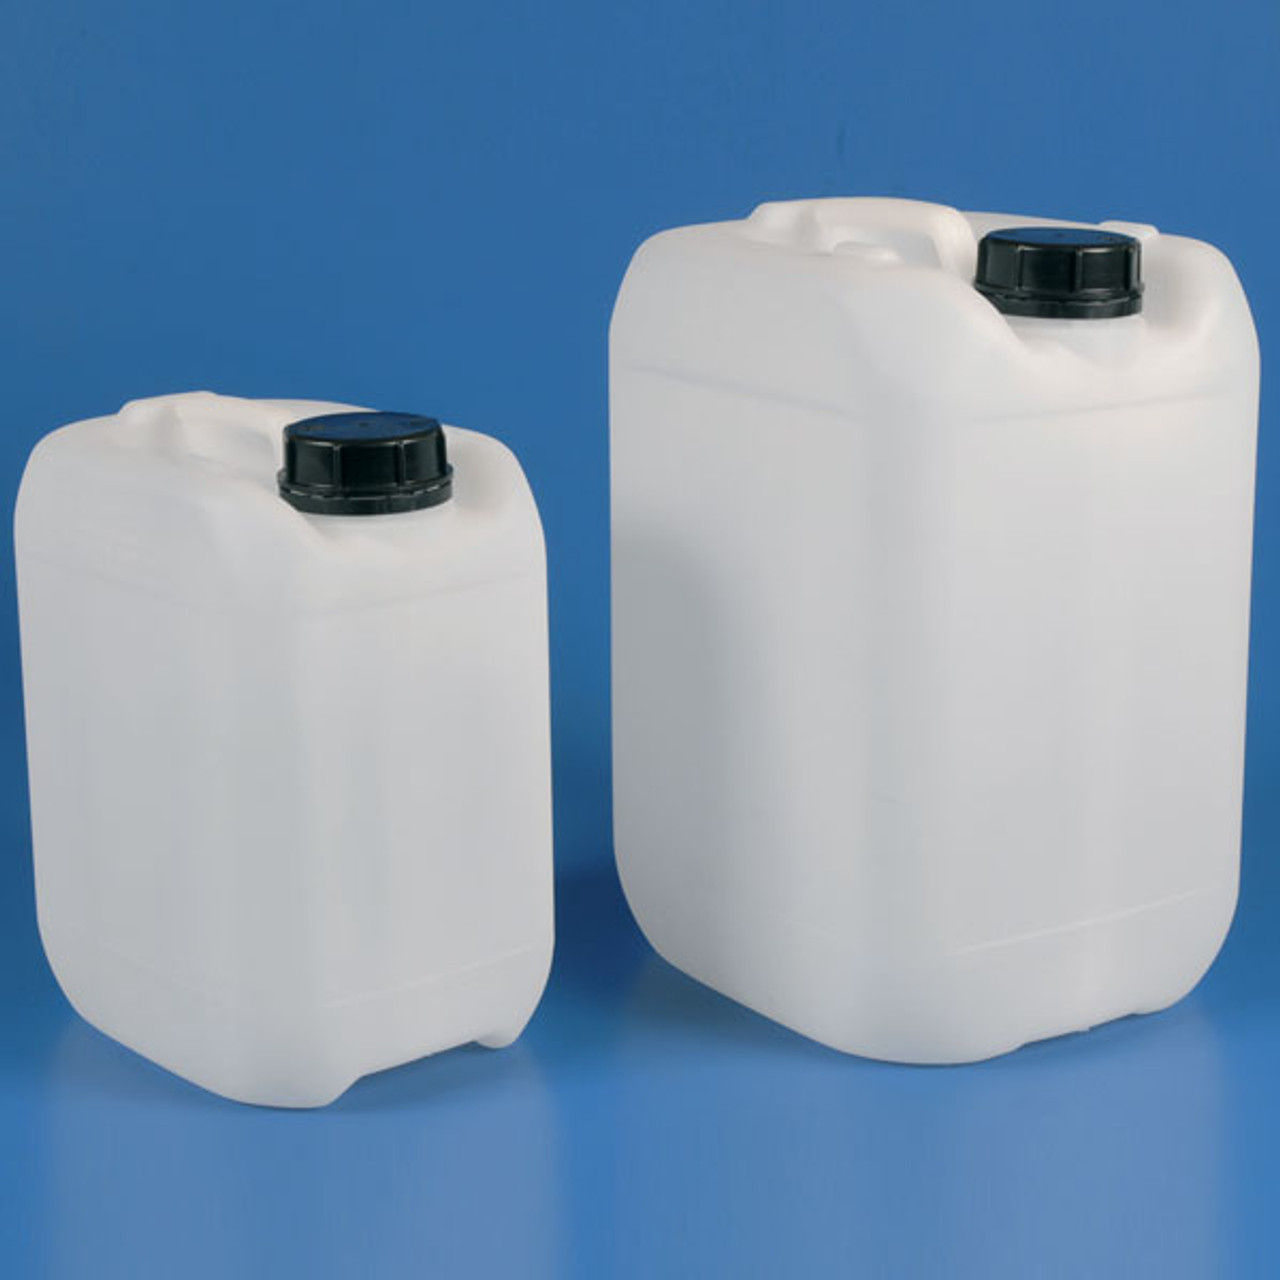 20L LITRE PLASTIC WATER CONTAINER CARRIER FOOD DRUM JERRYCAN JERRICAN BLUE  NEW